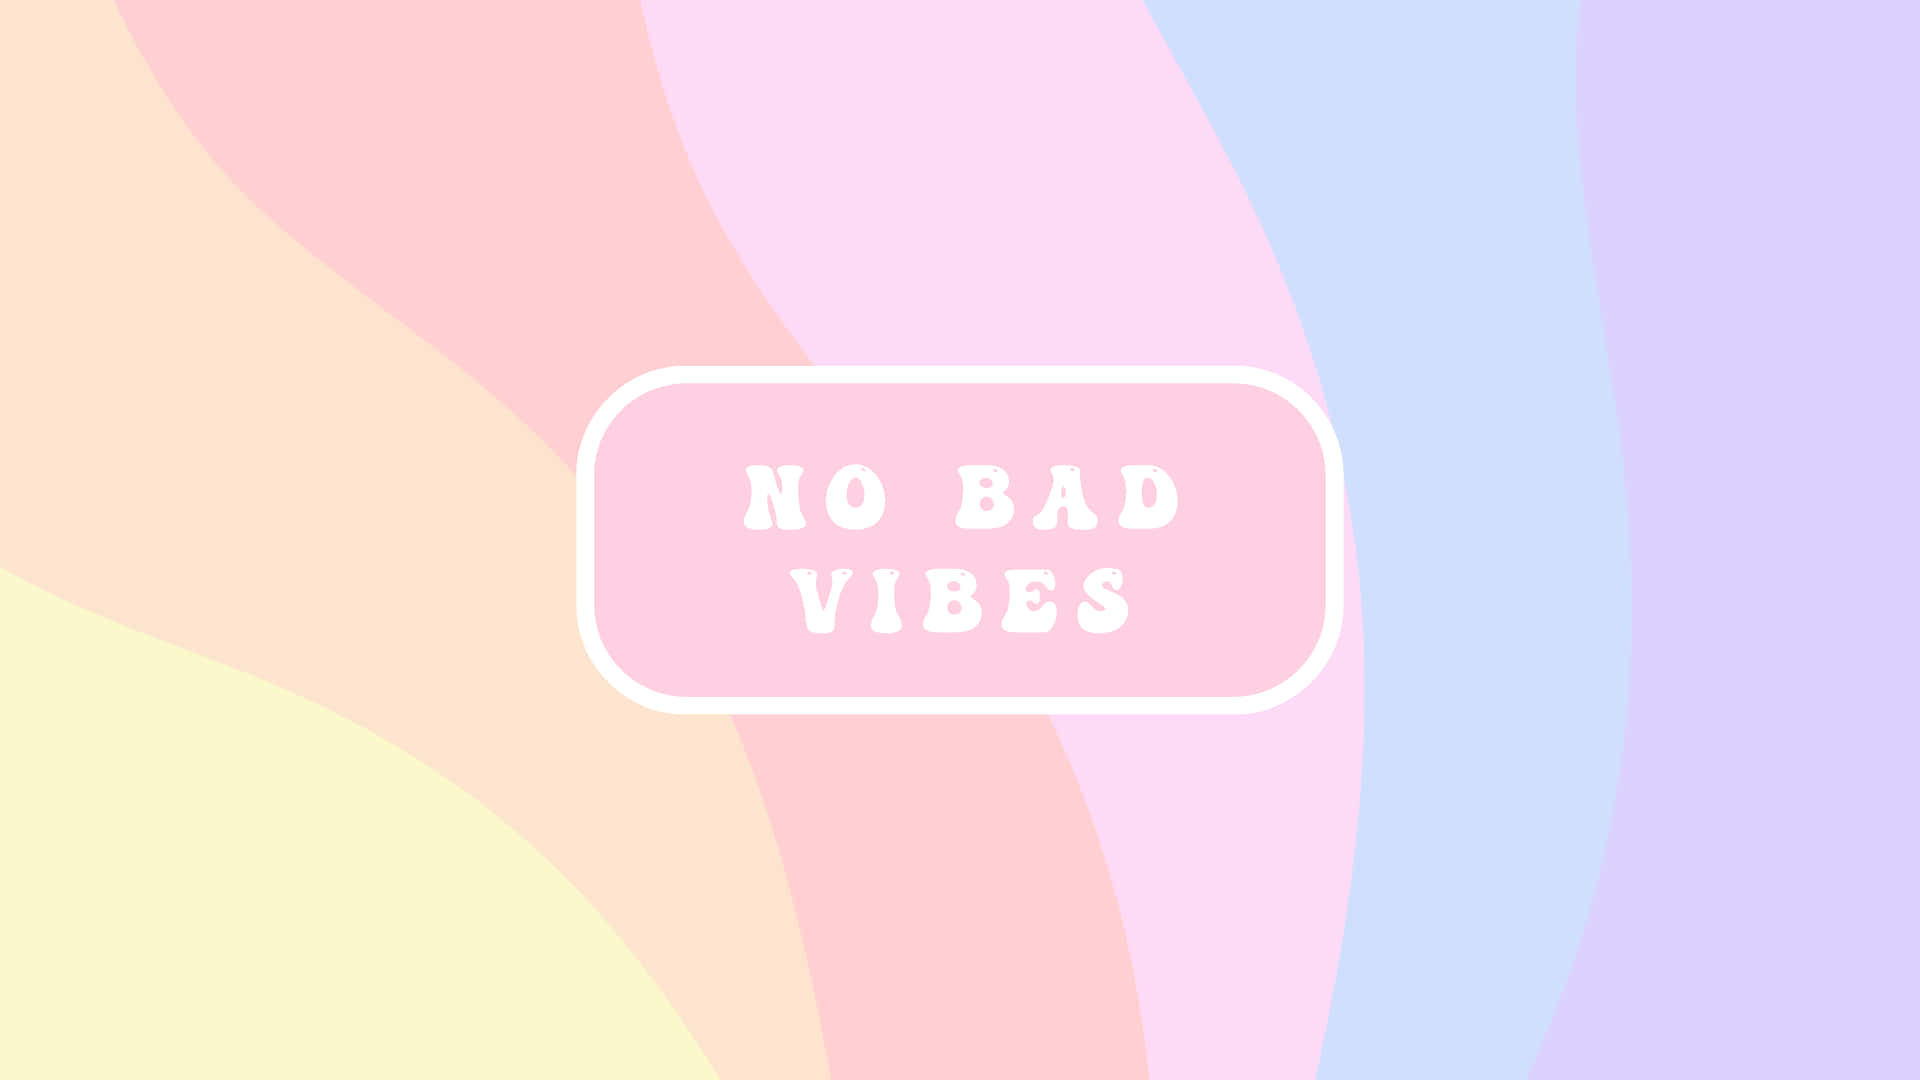 no bad vibes on a pastel colored background